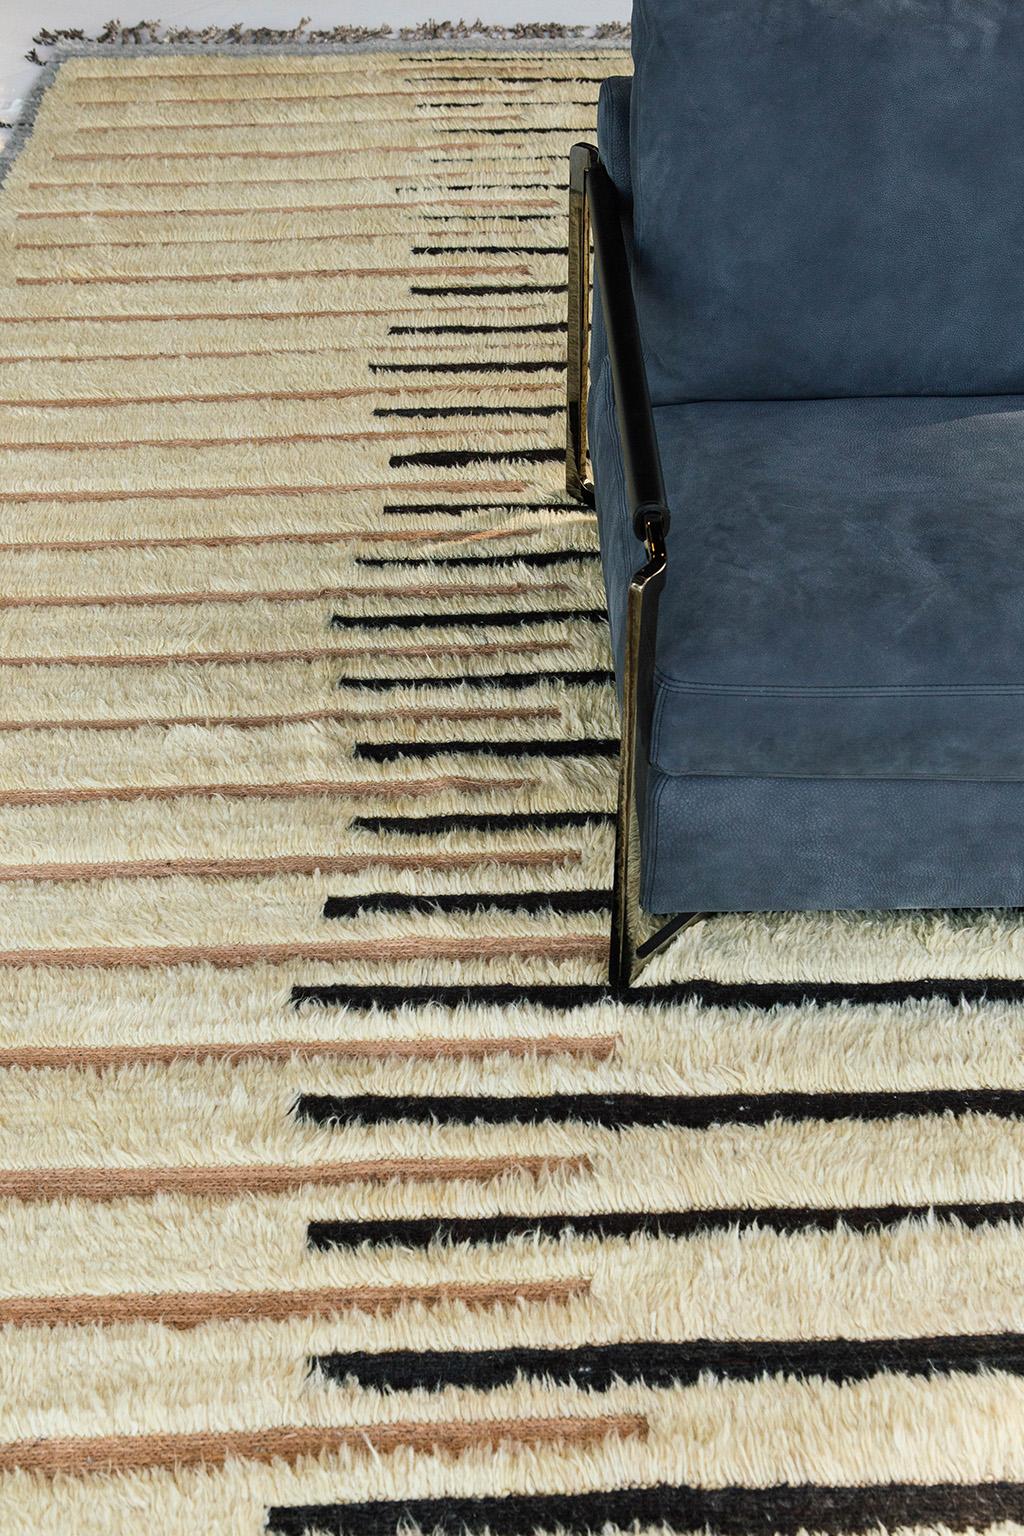 Handwoven of wool, Rashabar uses line work and color to create definition and movement. Embossed detailing of natural black, light brown and taupish grey move across the rug with a yellow shag surface. Natural flat weave runs around the border with